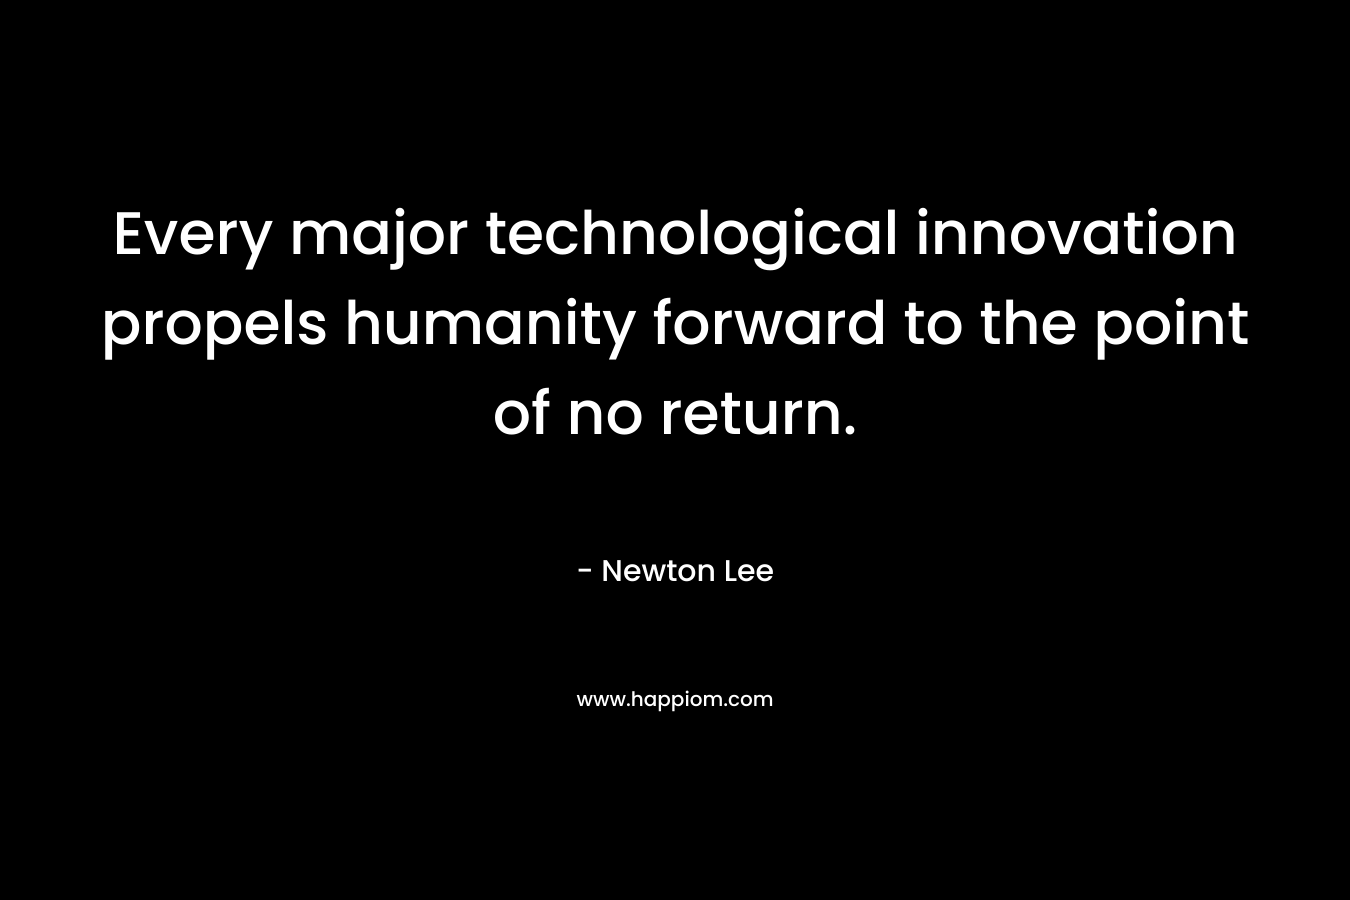 Every major technological innovation propels humanity forward to the point of no return.